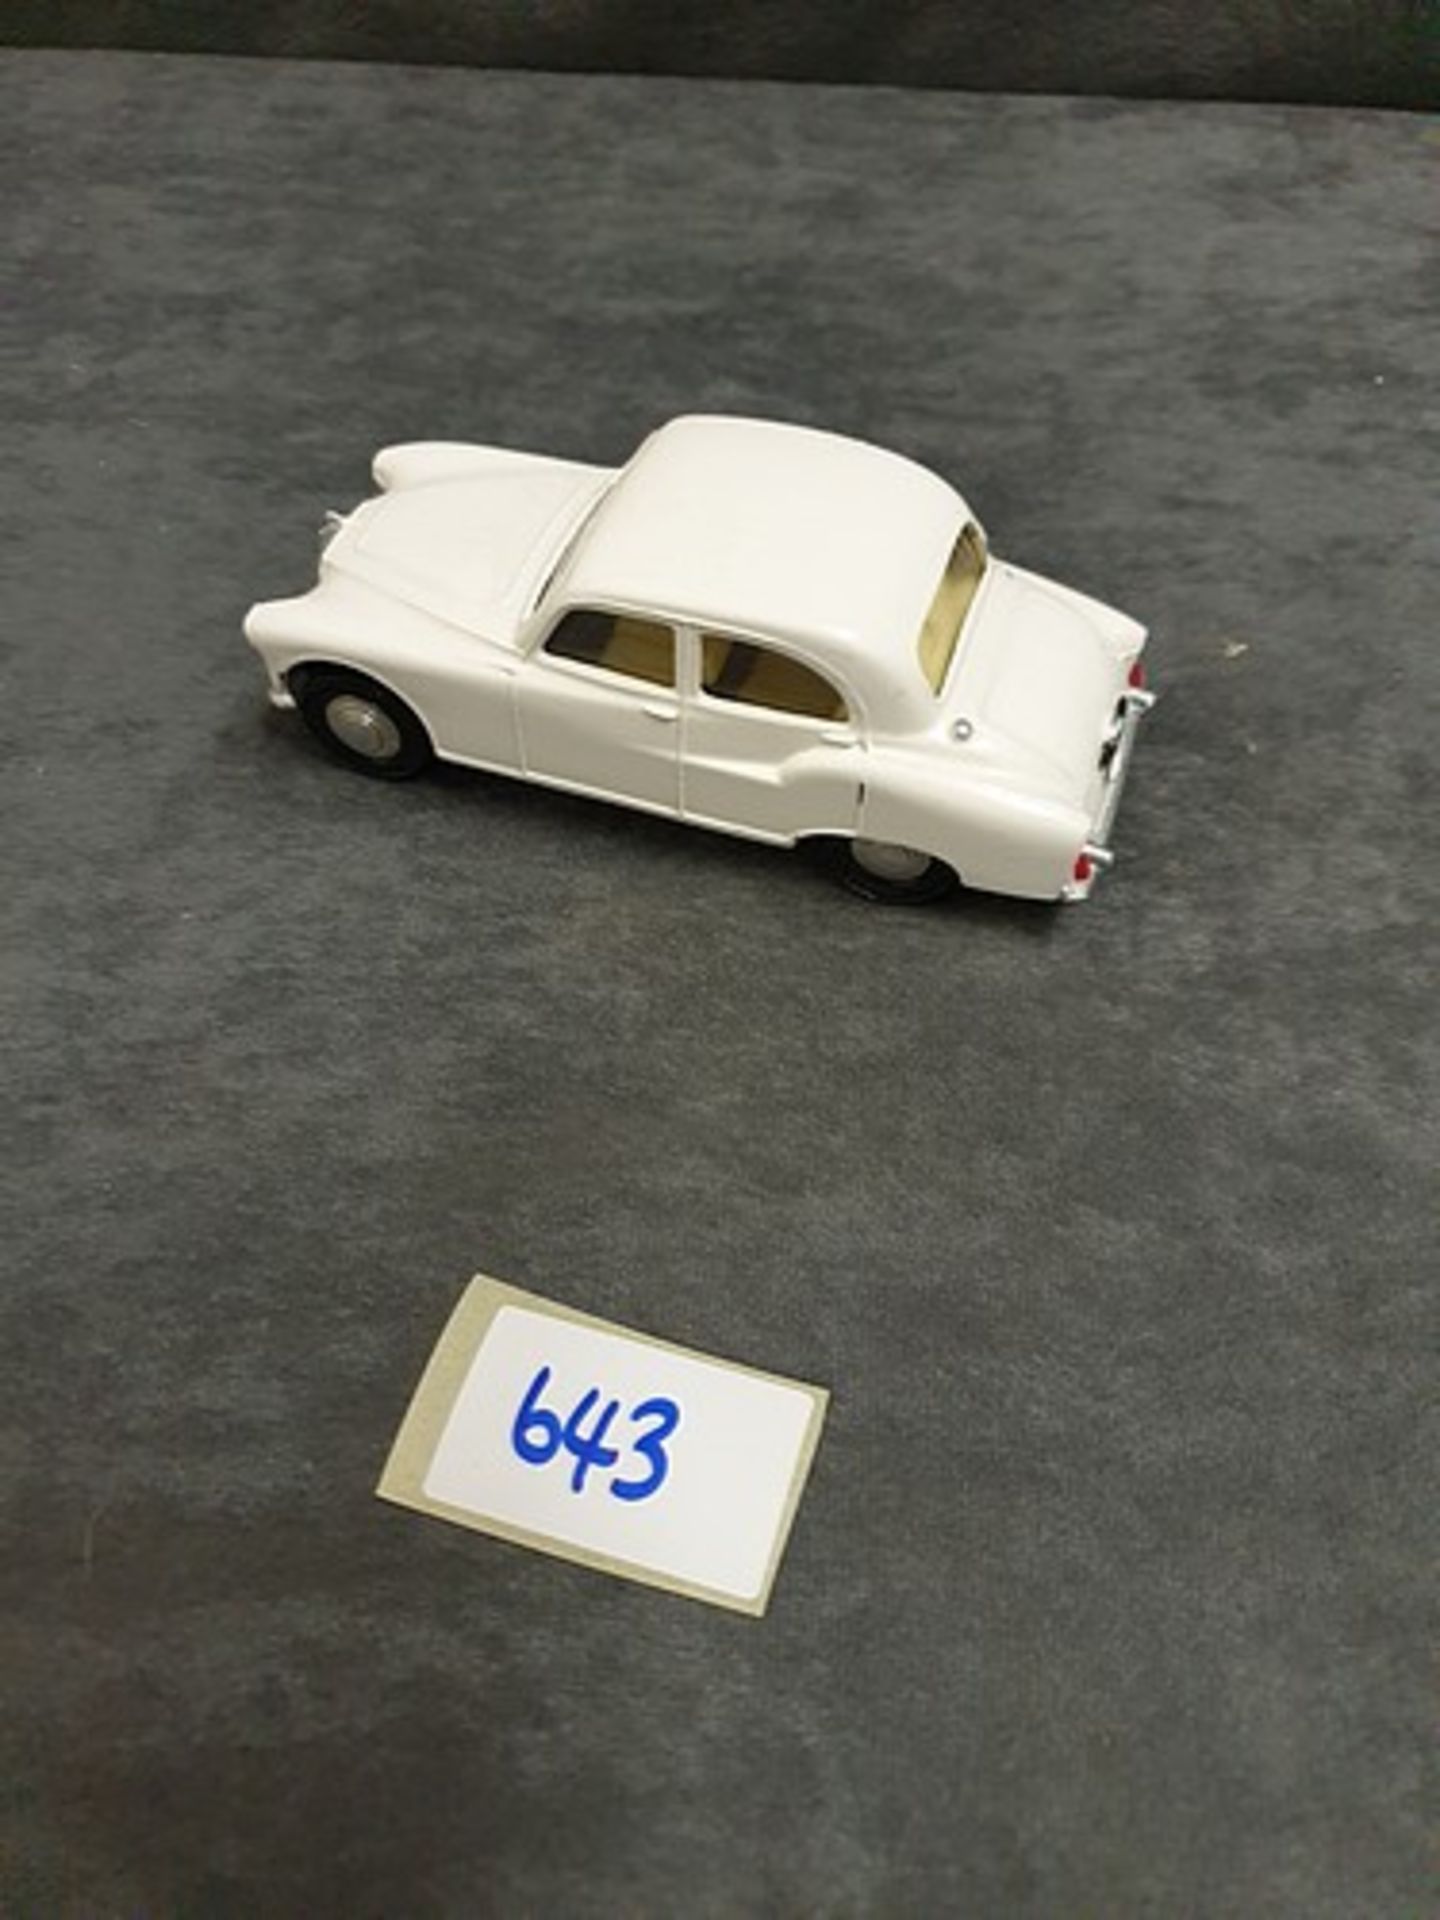 Spot-On By Tri-Ang Models Diecast #101 Armstrong Siddeley Sapphire In White And Cream Interior Model - Image 3 of 4